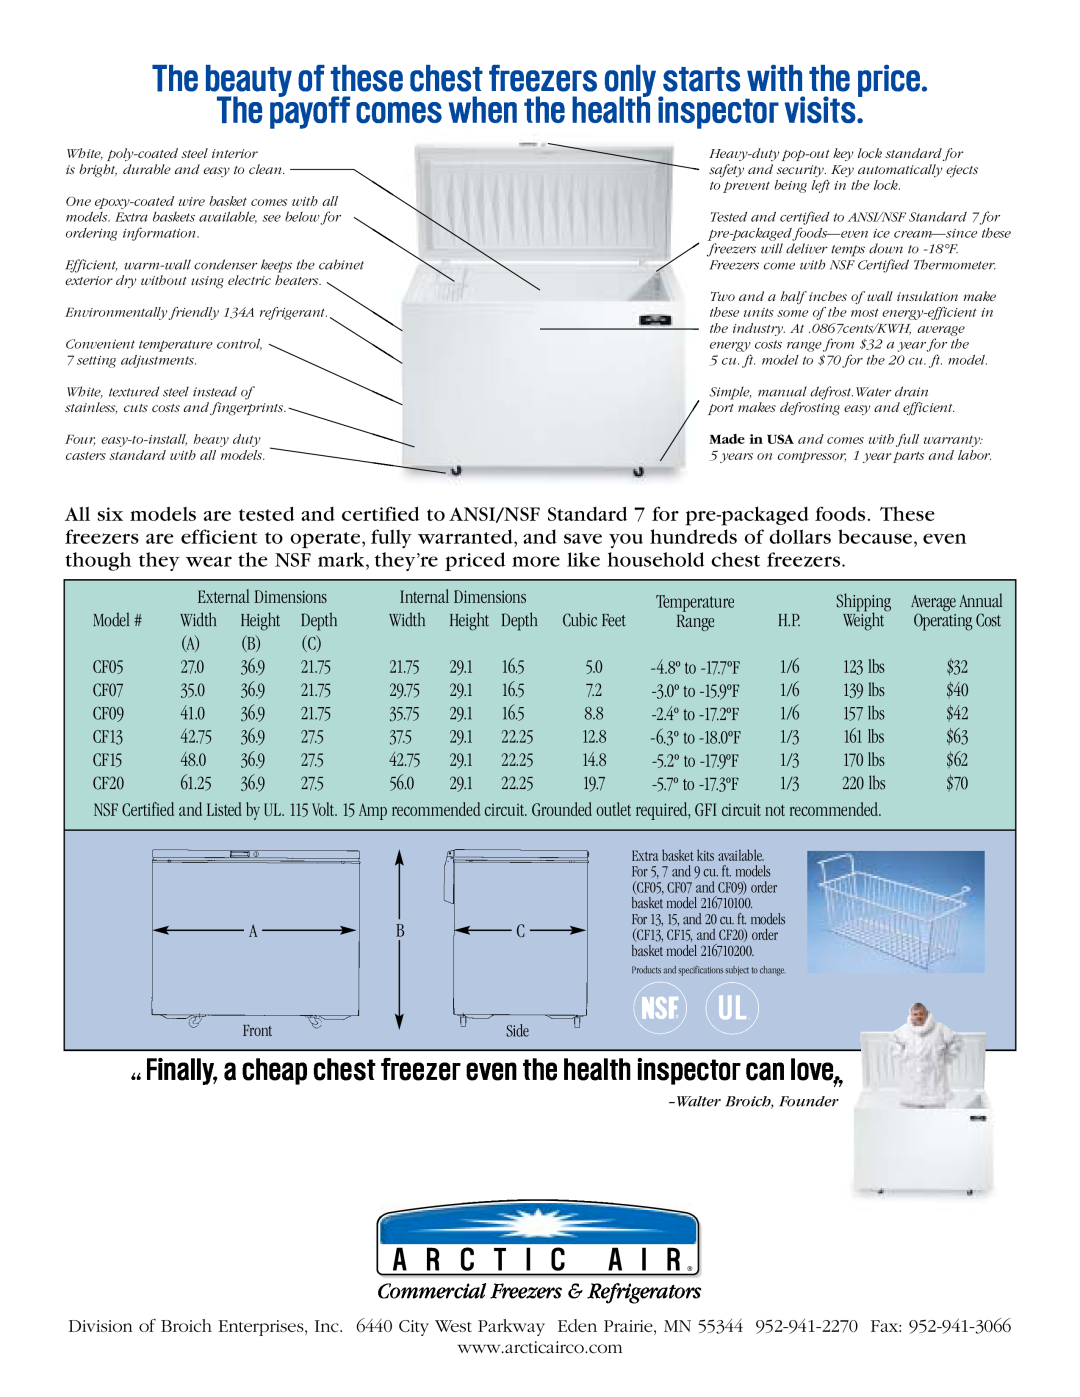 Arctic Air CF07 The payoff comes when the health inspector visits, A R C T I C A I R, Commercial Freezers & Refrigerators 